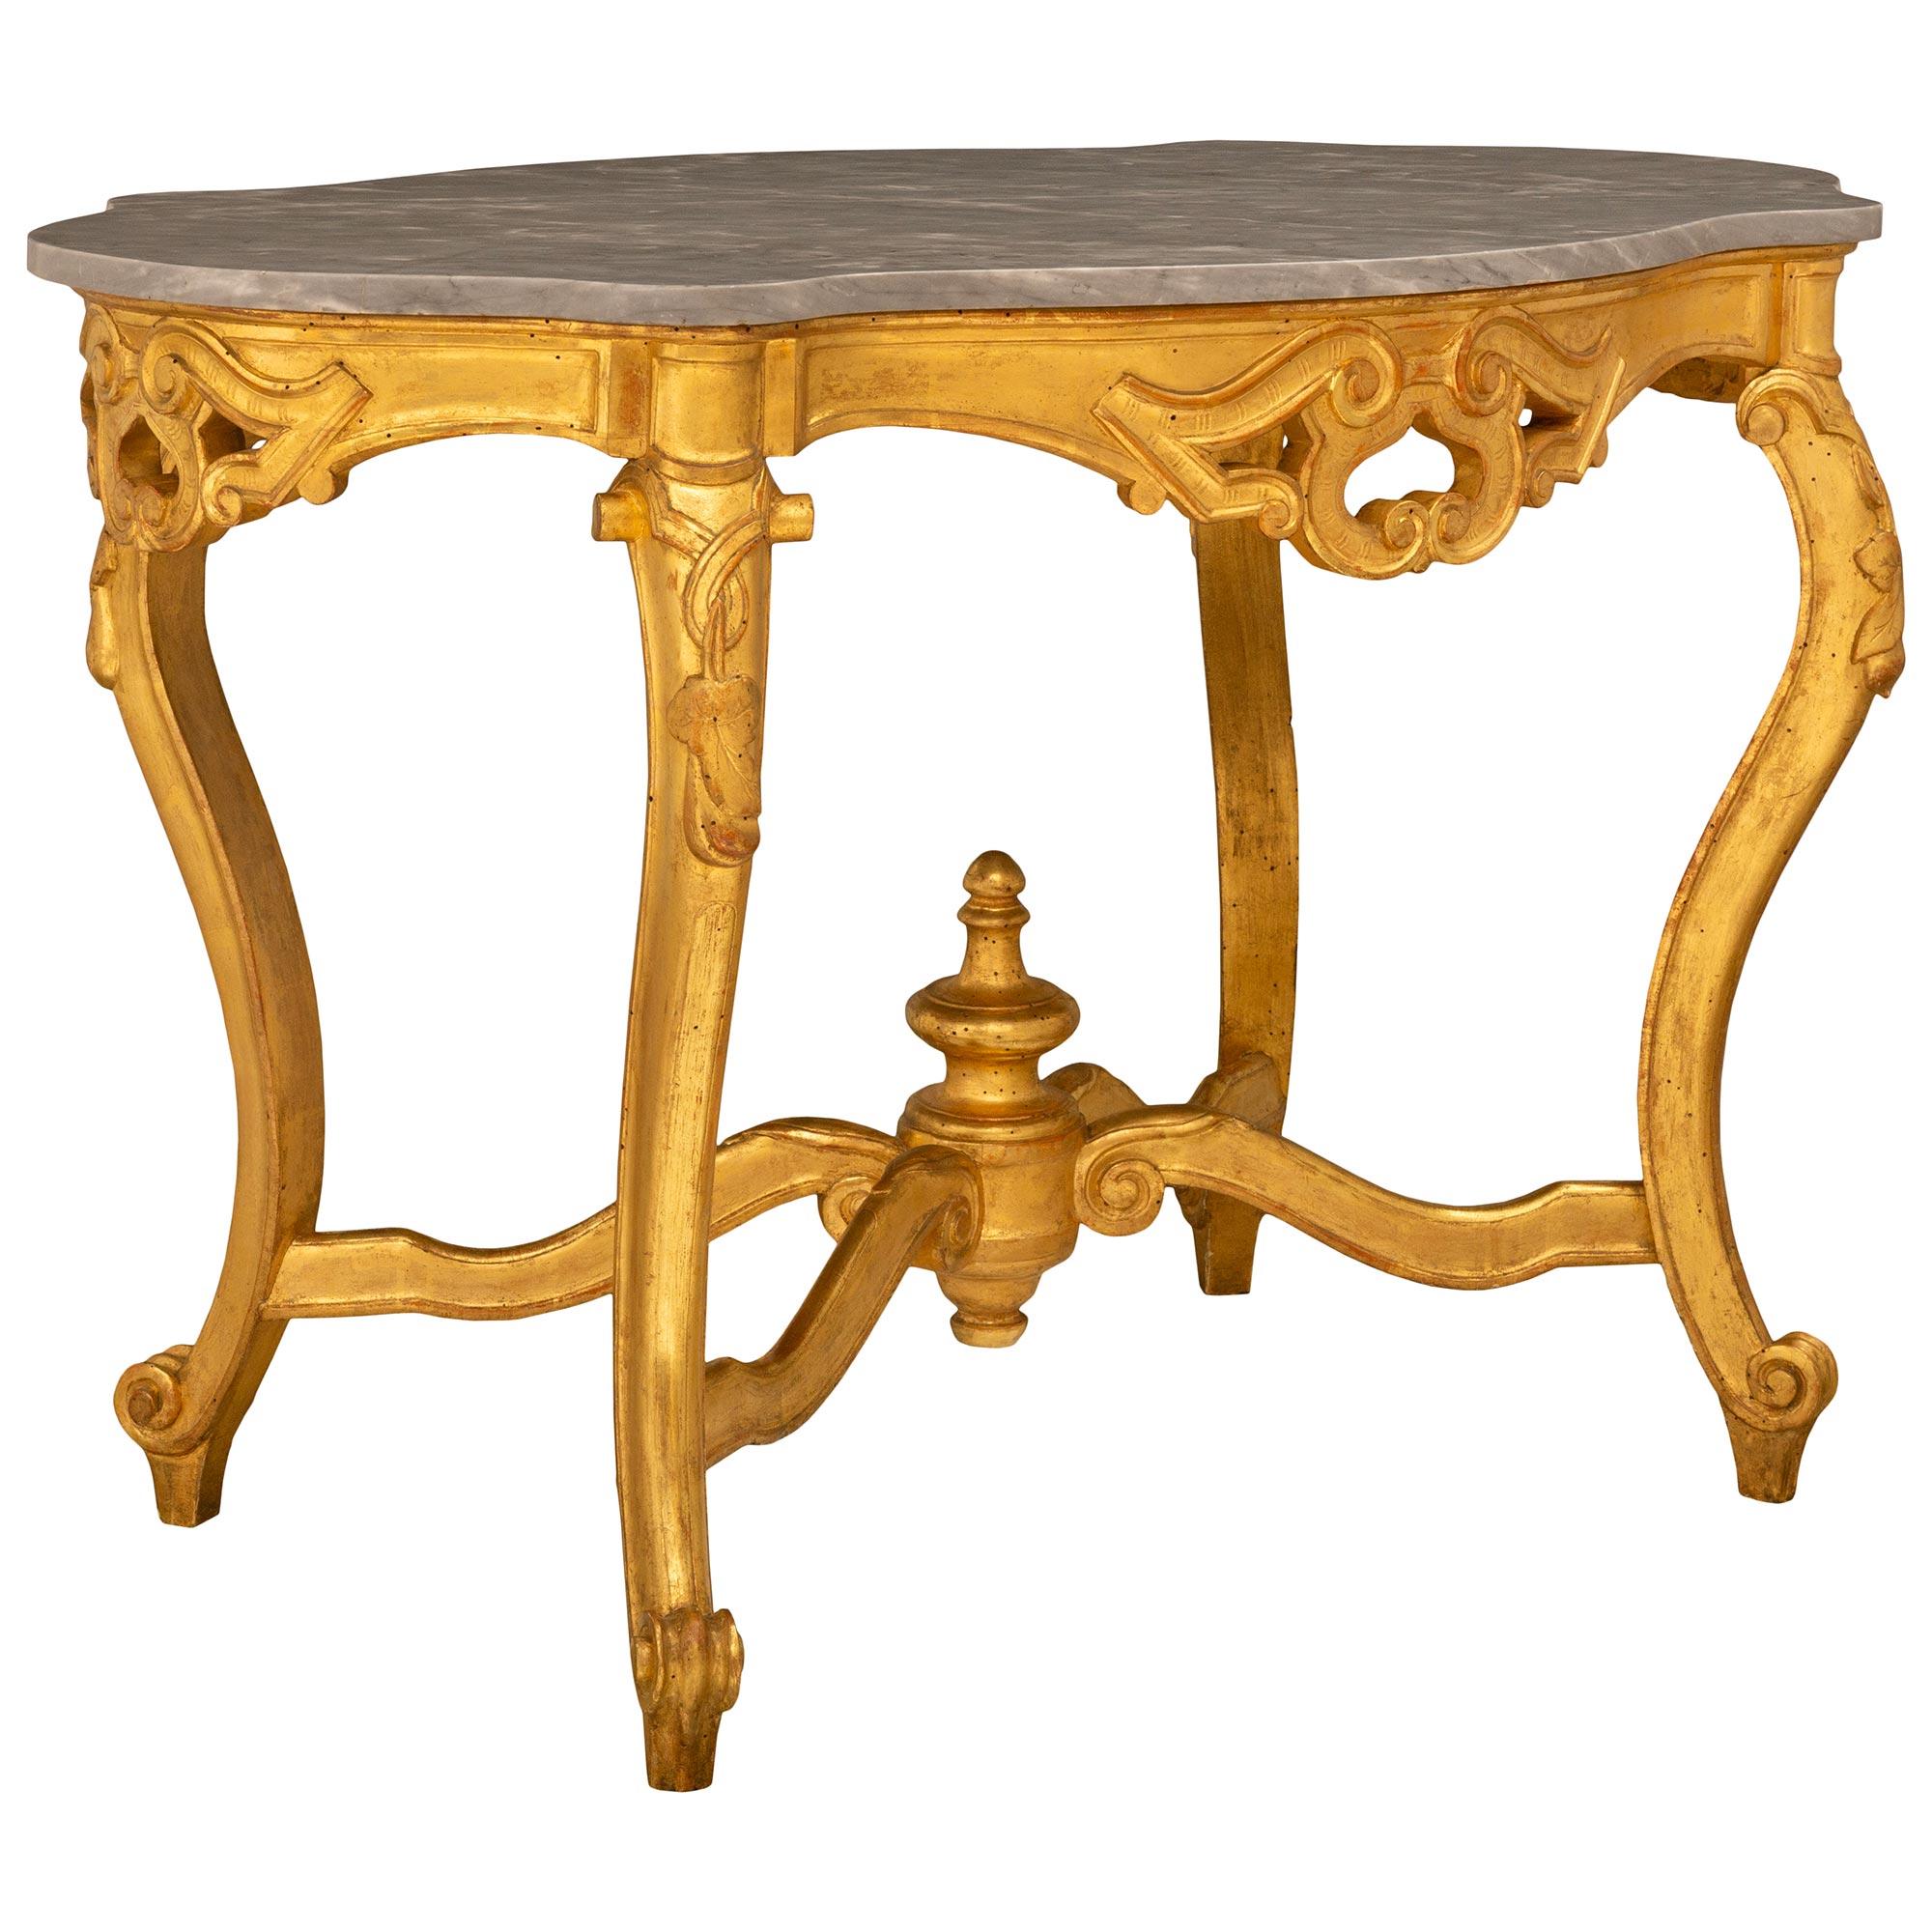 Italian 19th Century Louis XV Style Giltwood and Marble Oval Center Table In Good Condition For Sale In West Palm Beach, FL